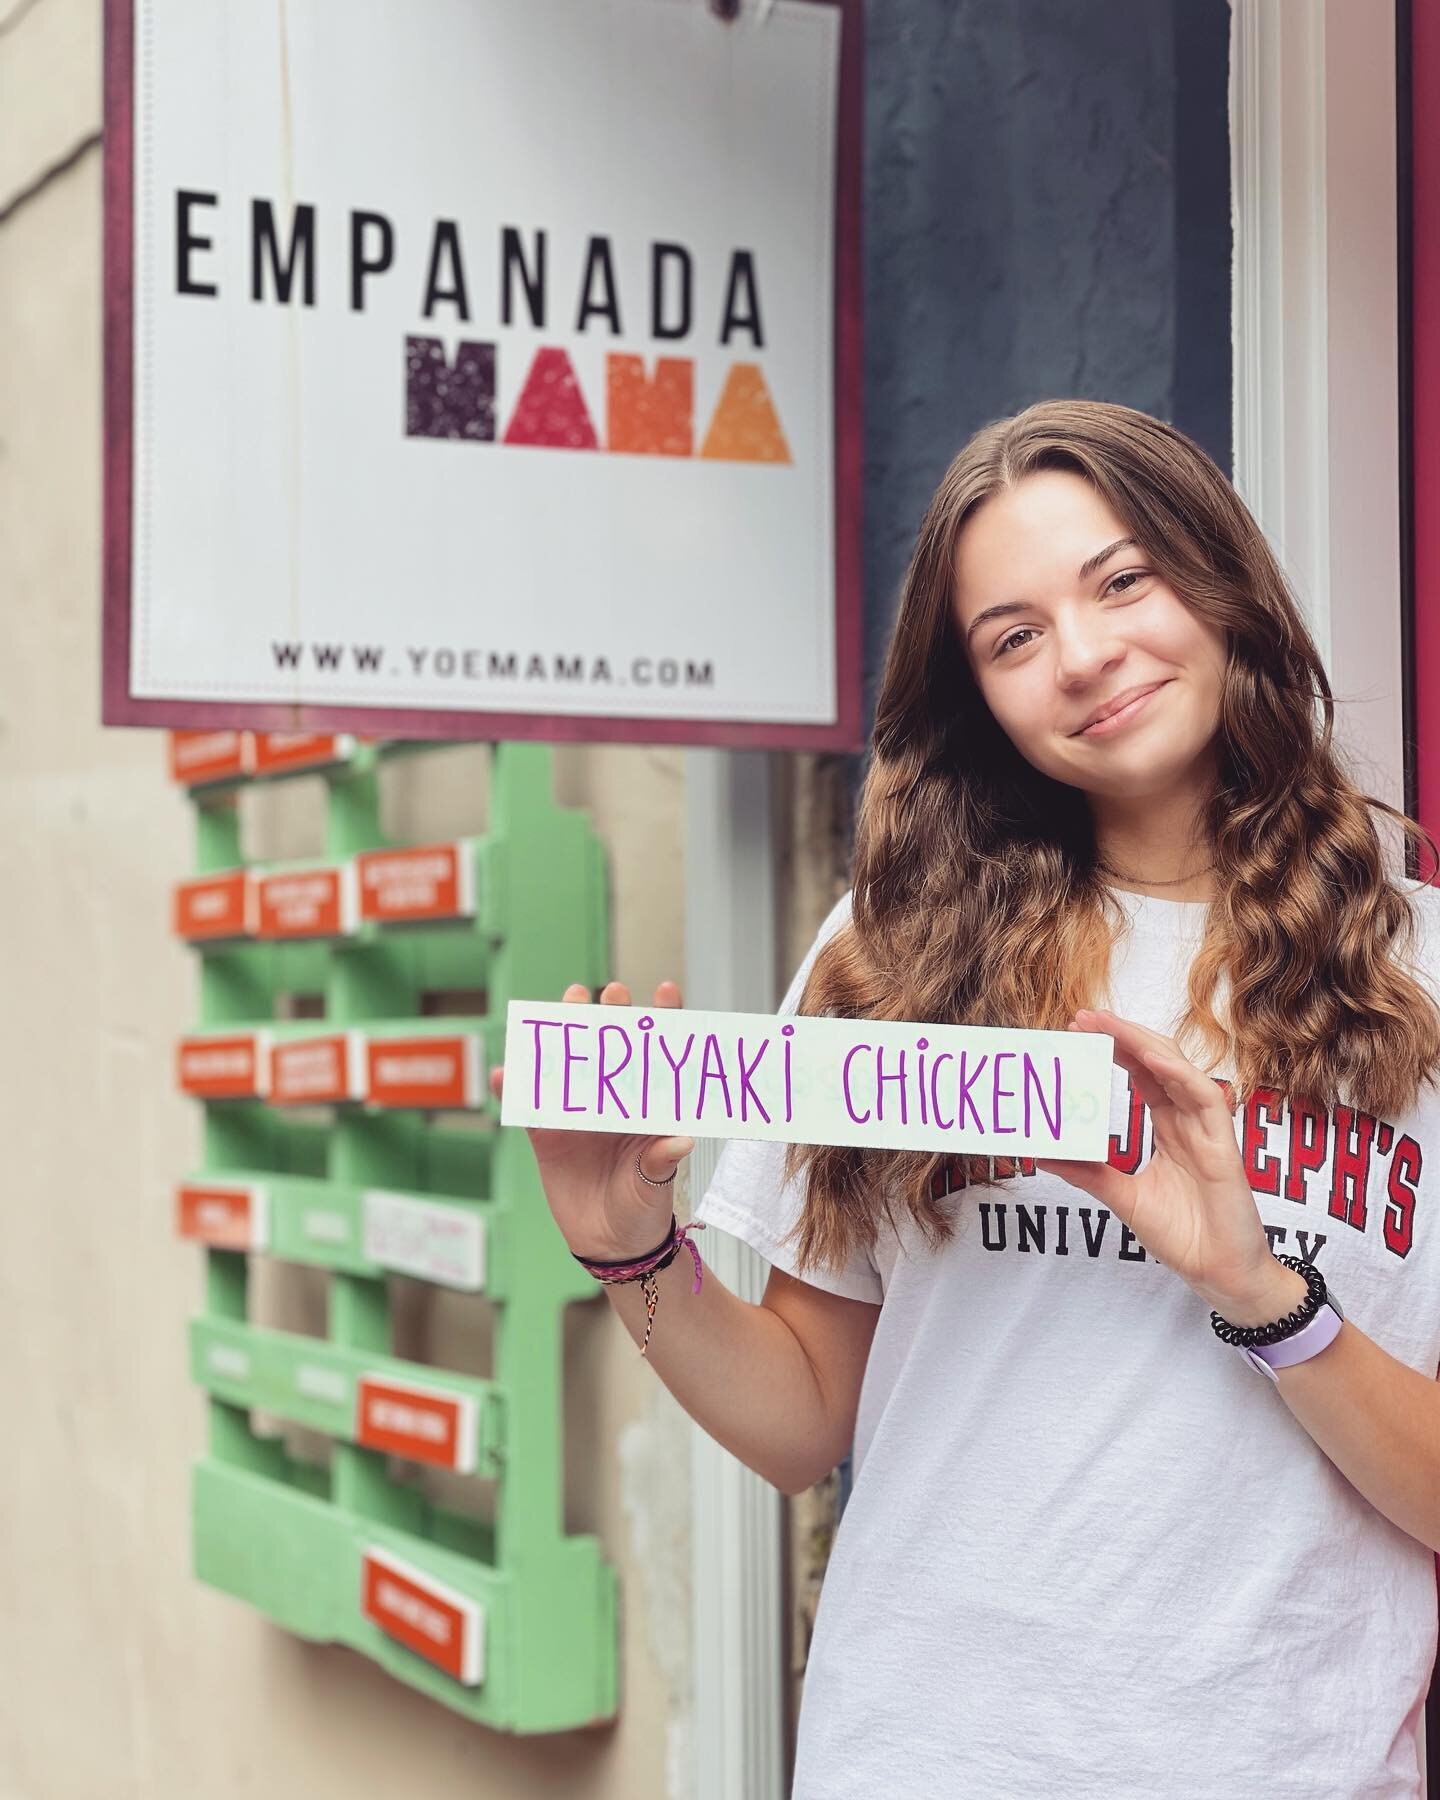 Staff Pick Saturday:

Kate&rsquo;s pick this week is Teriyaki Chicken!
&ldquo;Thankful we brought this nada back because Teriyaki chicken is one of my favorite meals! Pair it with the Sriracha Lime Crema or Sweet Thai Chili.&rdquo;
&bull;
&bull;
&bul